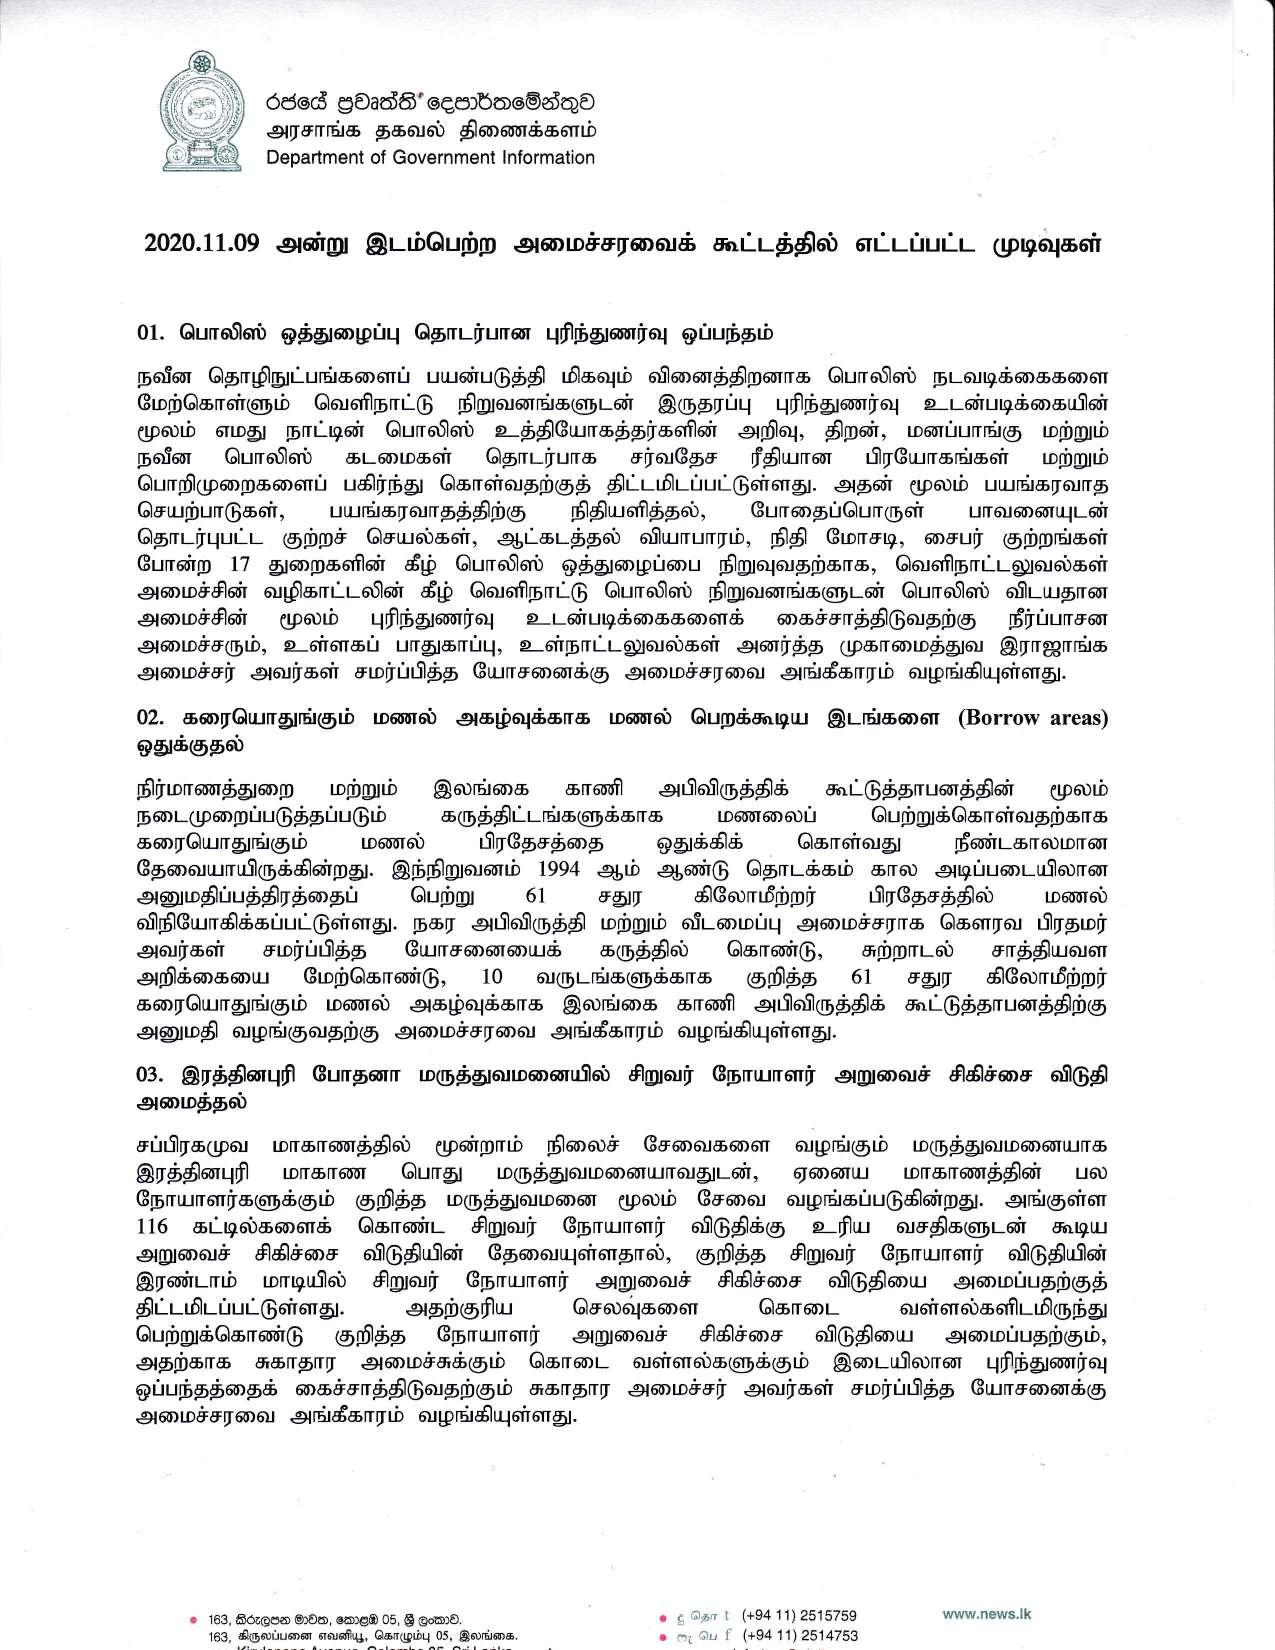 Cabinet Decsion on 09.11.2020 Tamil page 001